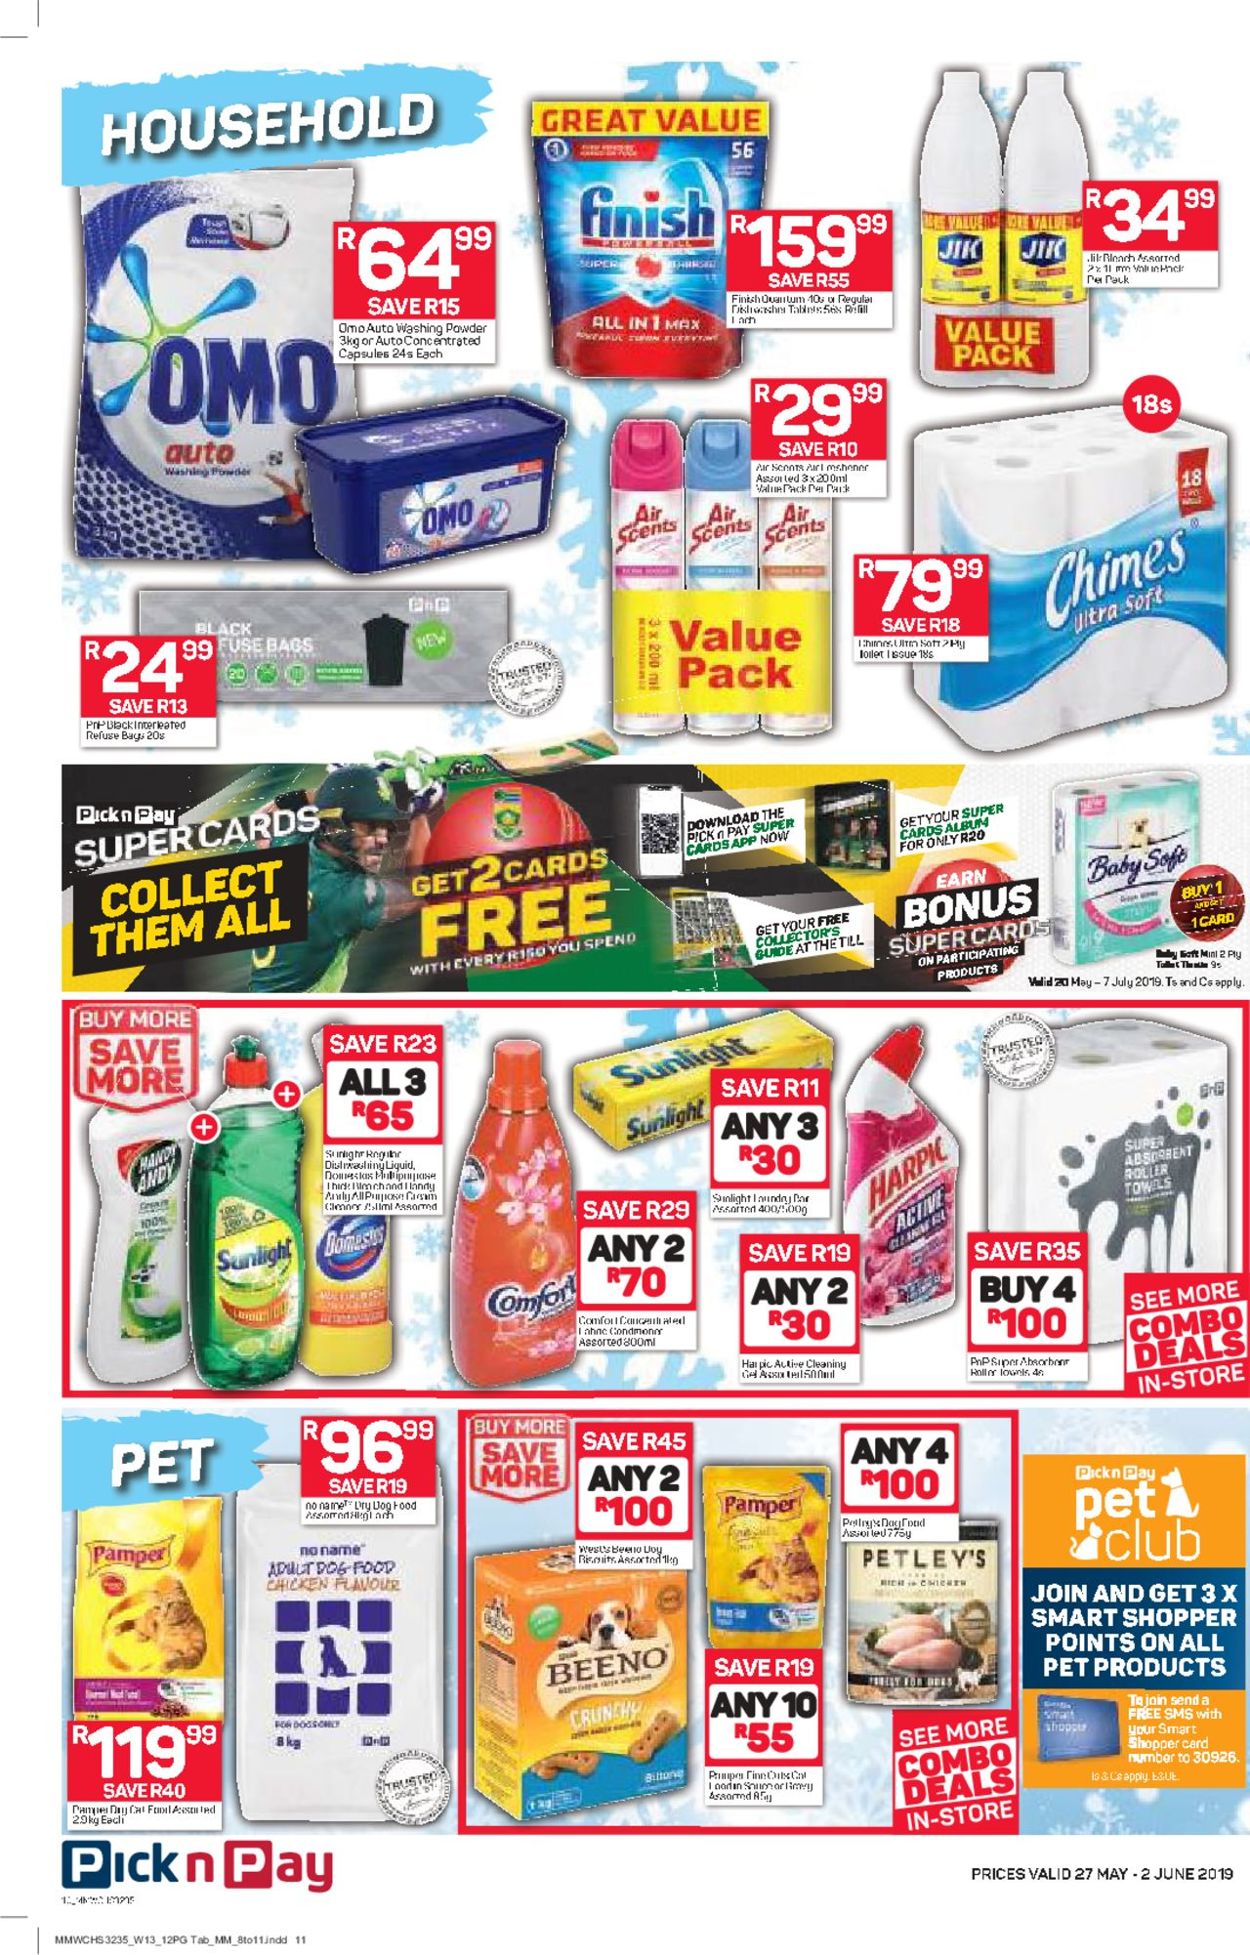 Pick n Pay Catalogue - 2019/05/27-2019/06/02 (Page 10)